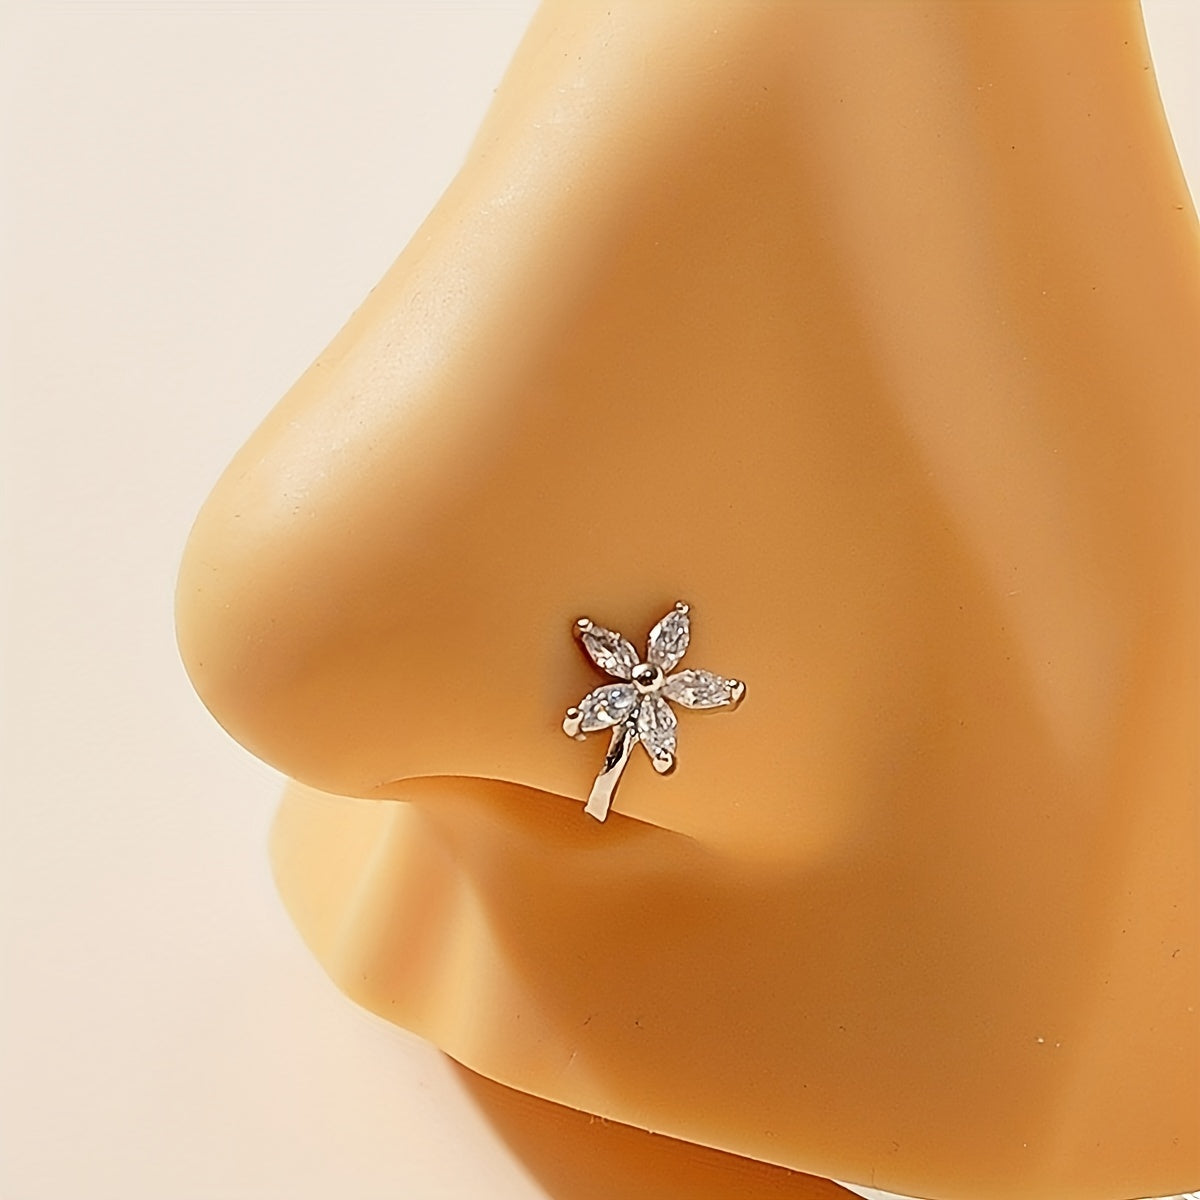 Add a touch of elegance with our Simple Flower Copper Nose Clip - No Piercing U-Shape Nose Jewelry Decor